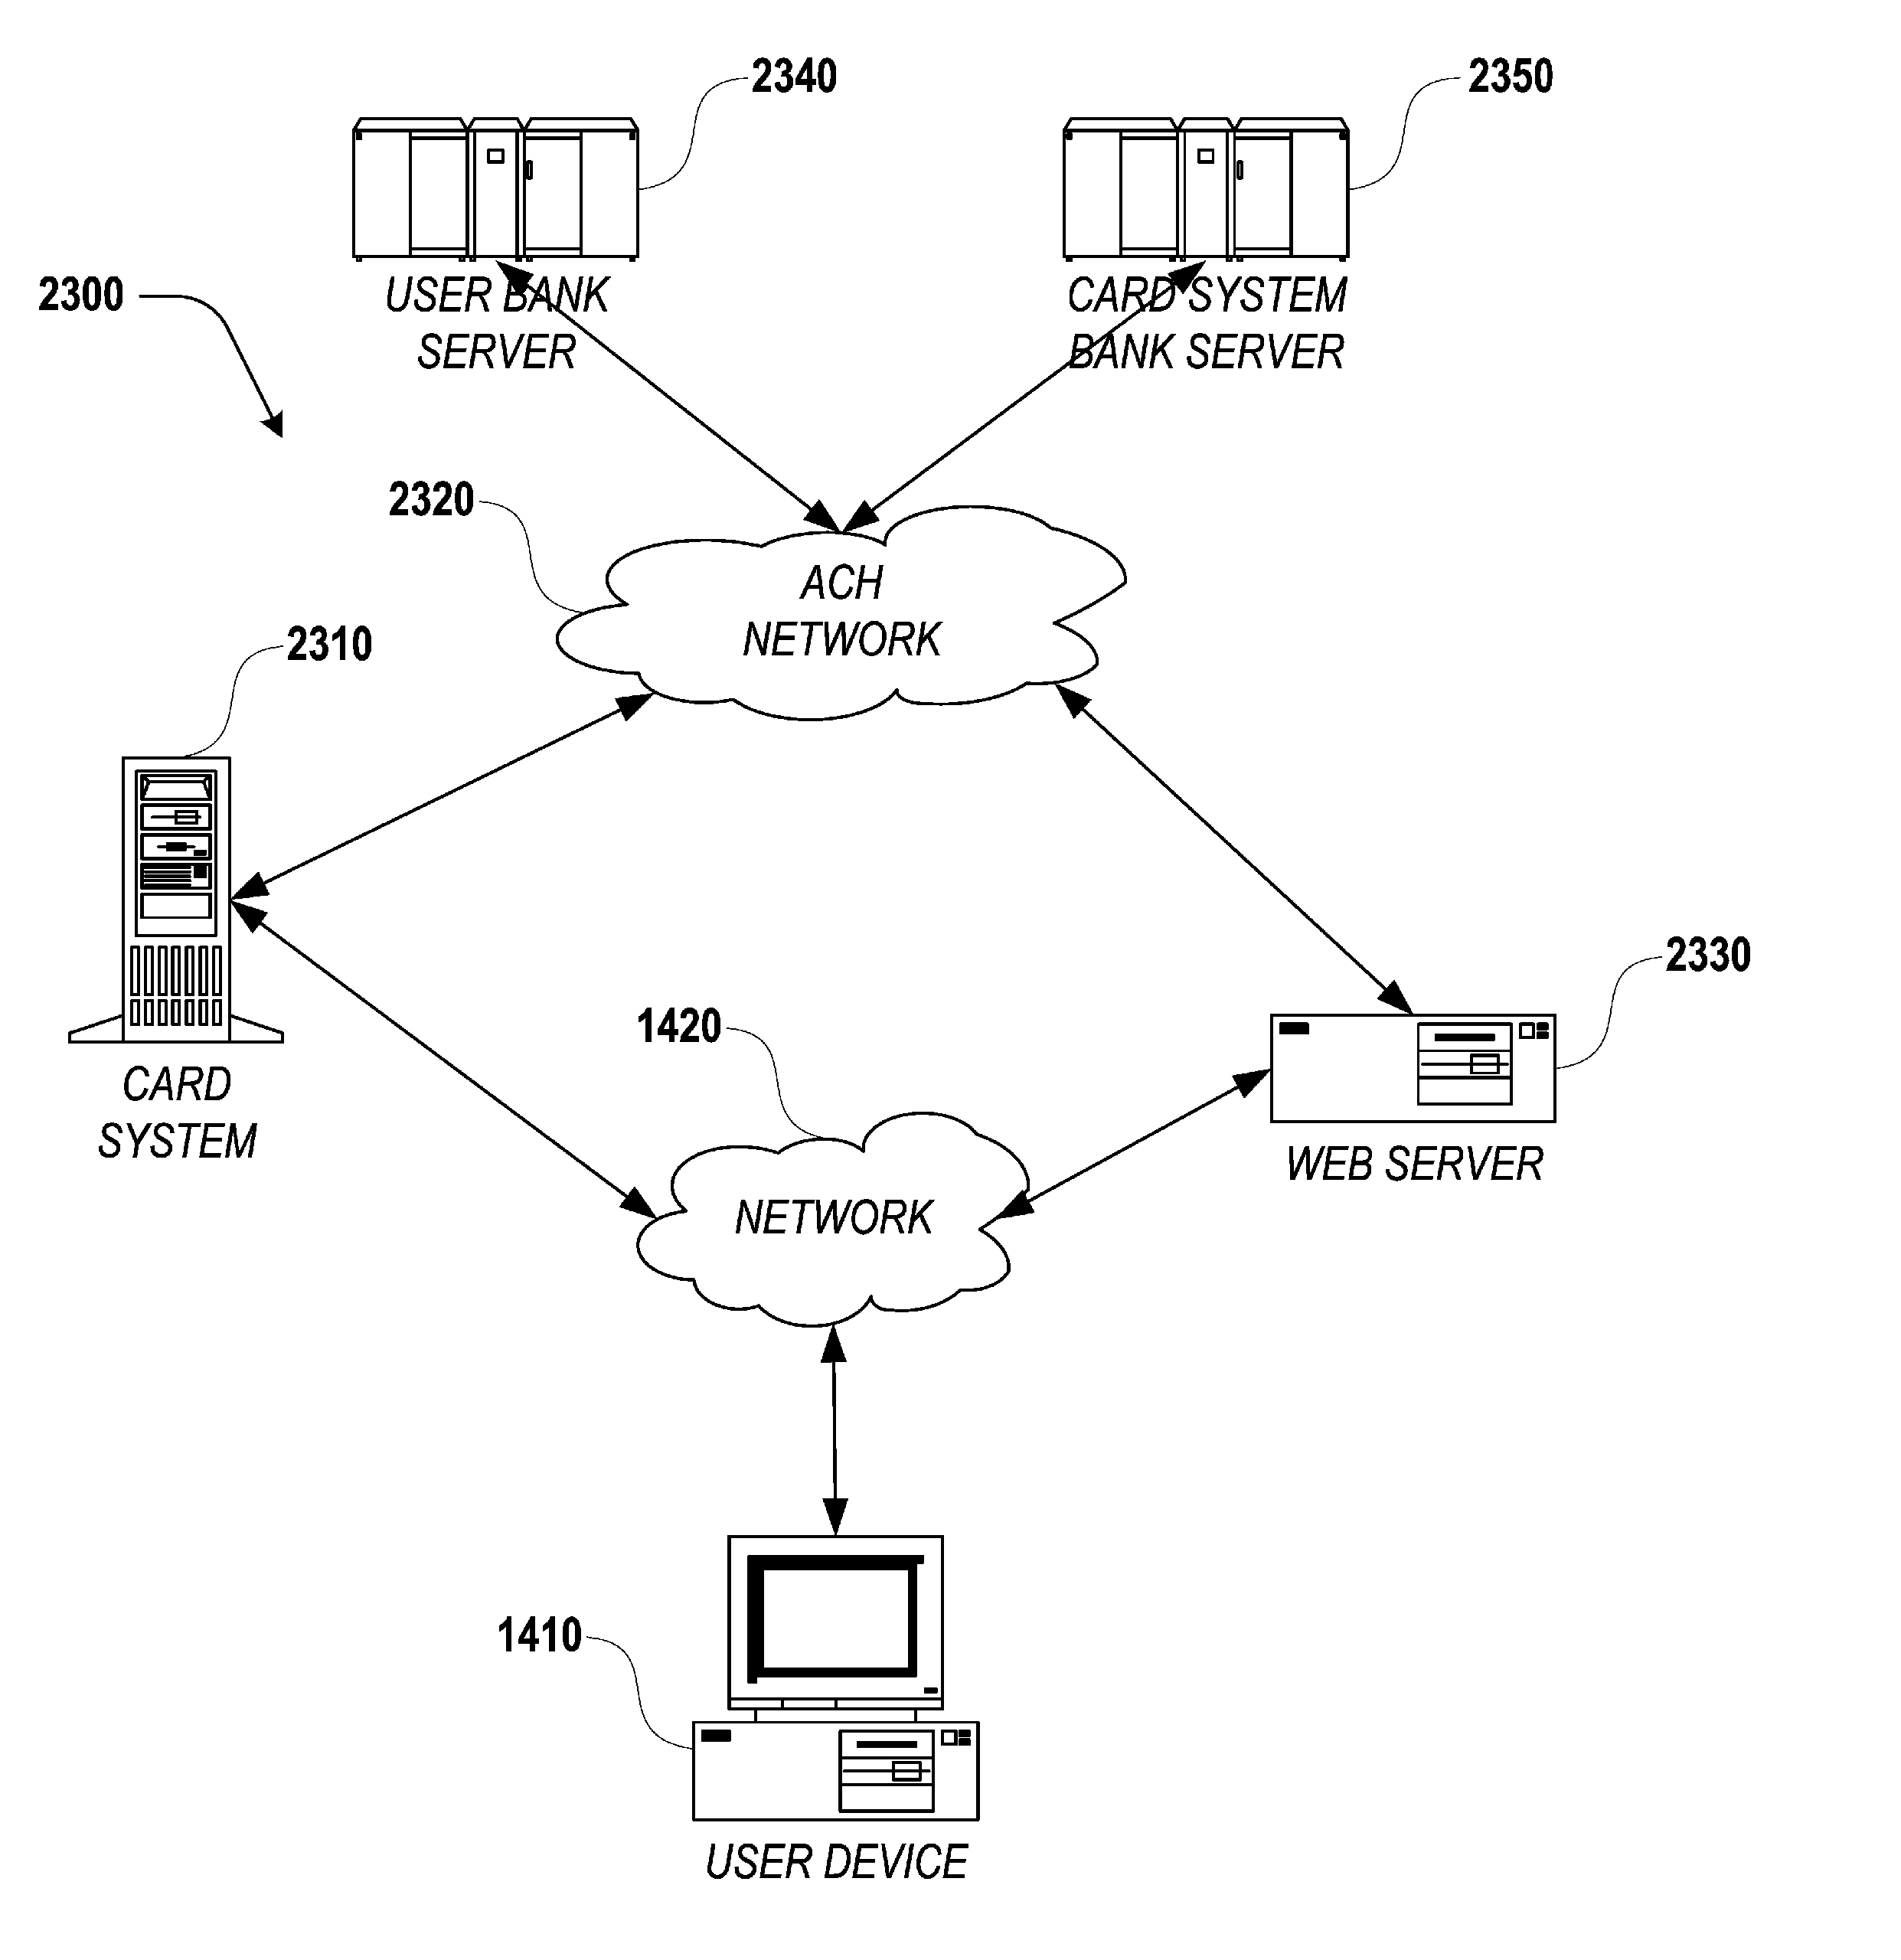 Automated clearing house compatible loadable debit card system and method